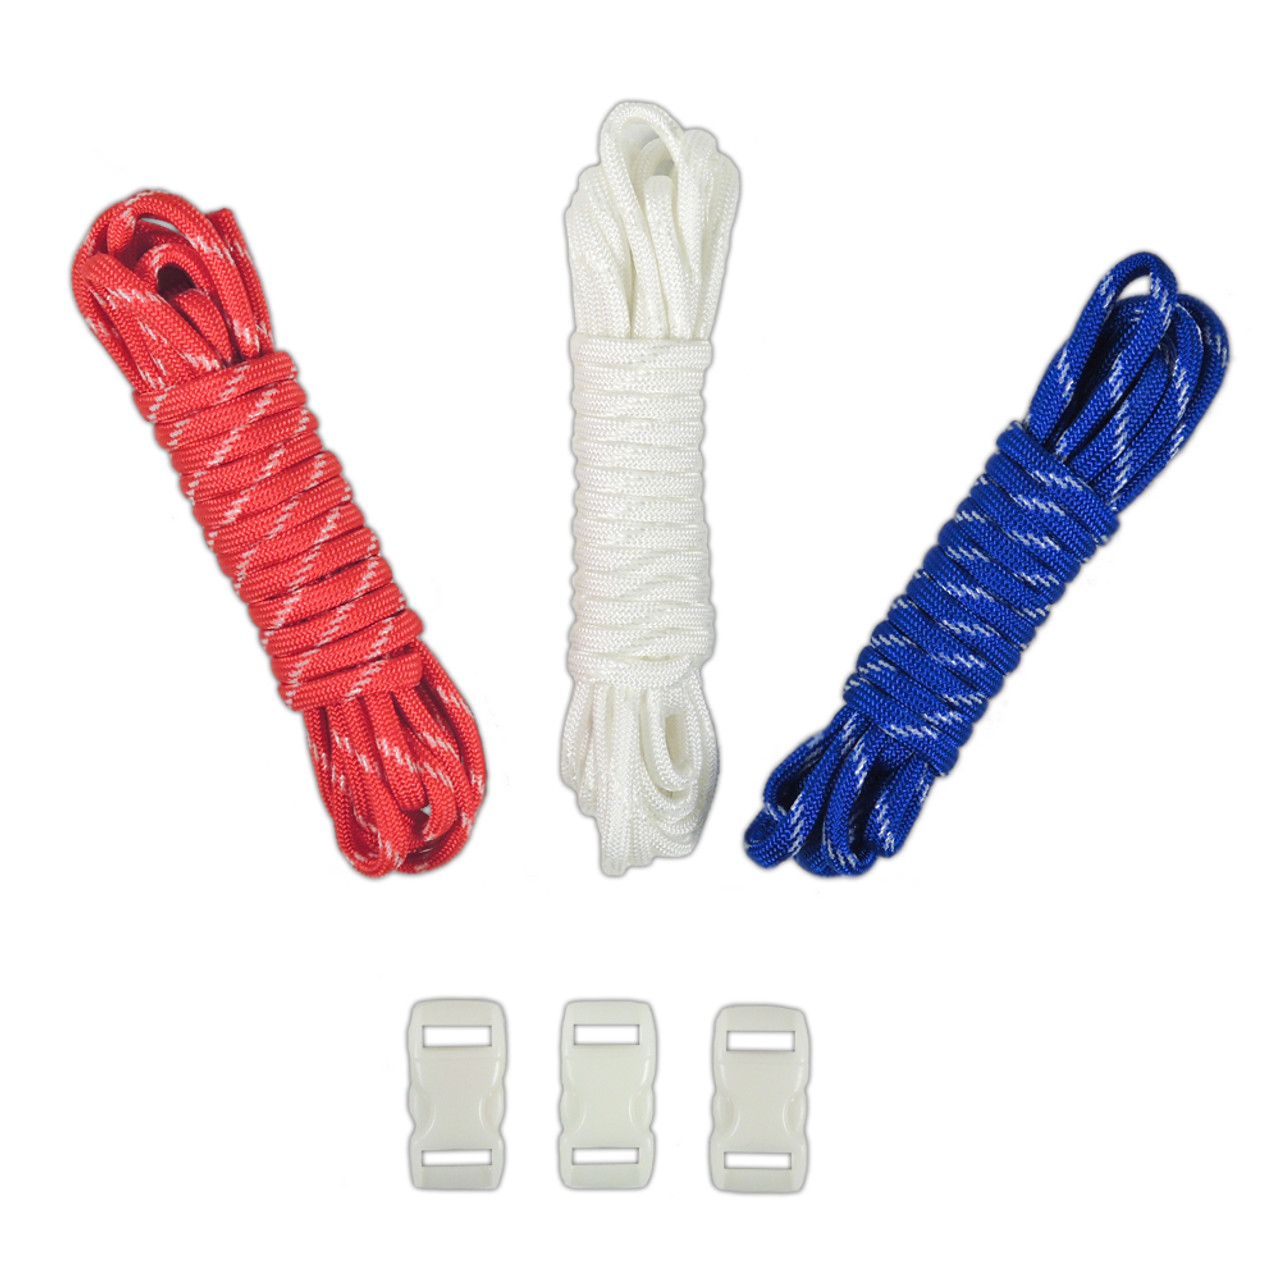 Paracord & Buckles Combo Kit - U.S.A. Glow In The Dark